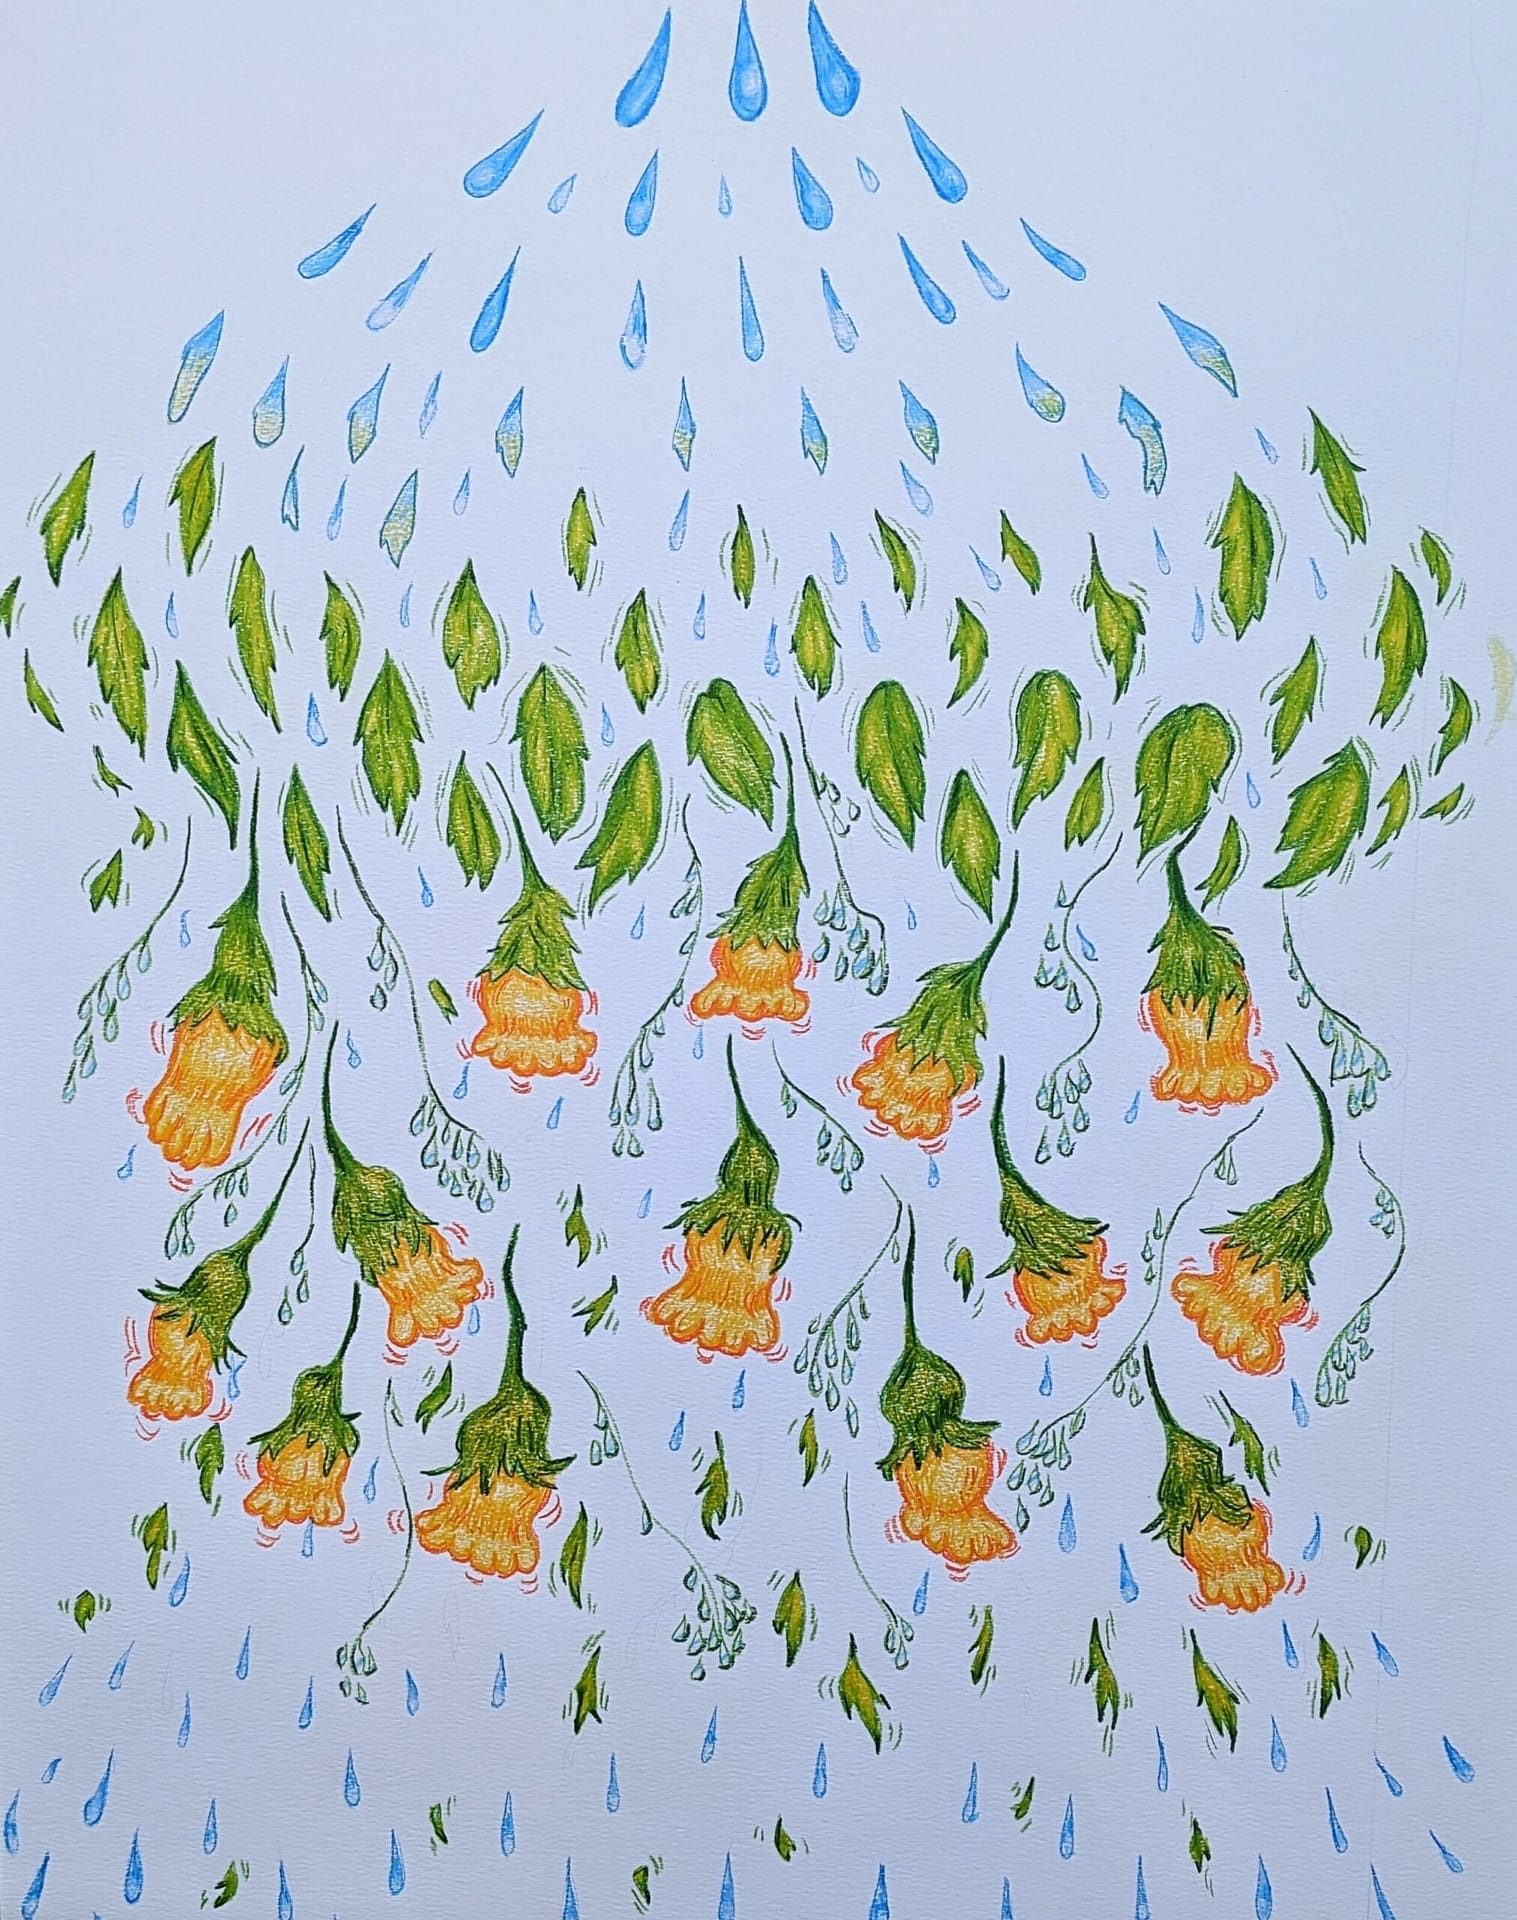 Artwork by Max Quilliam. In this illustration, ‘There is More to Come’, raindrops morph into leaves, which morph into flowers, then leaves, then into raindrops again gradually down the page.